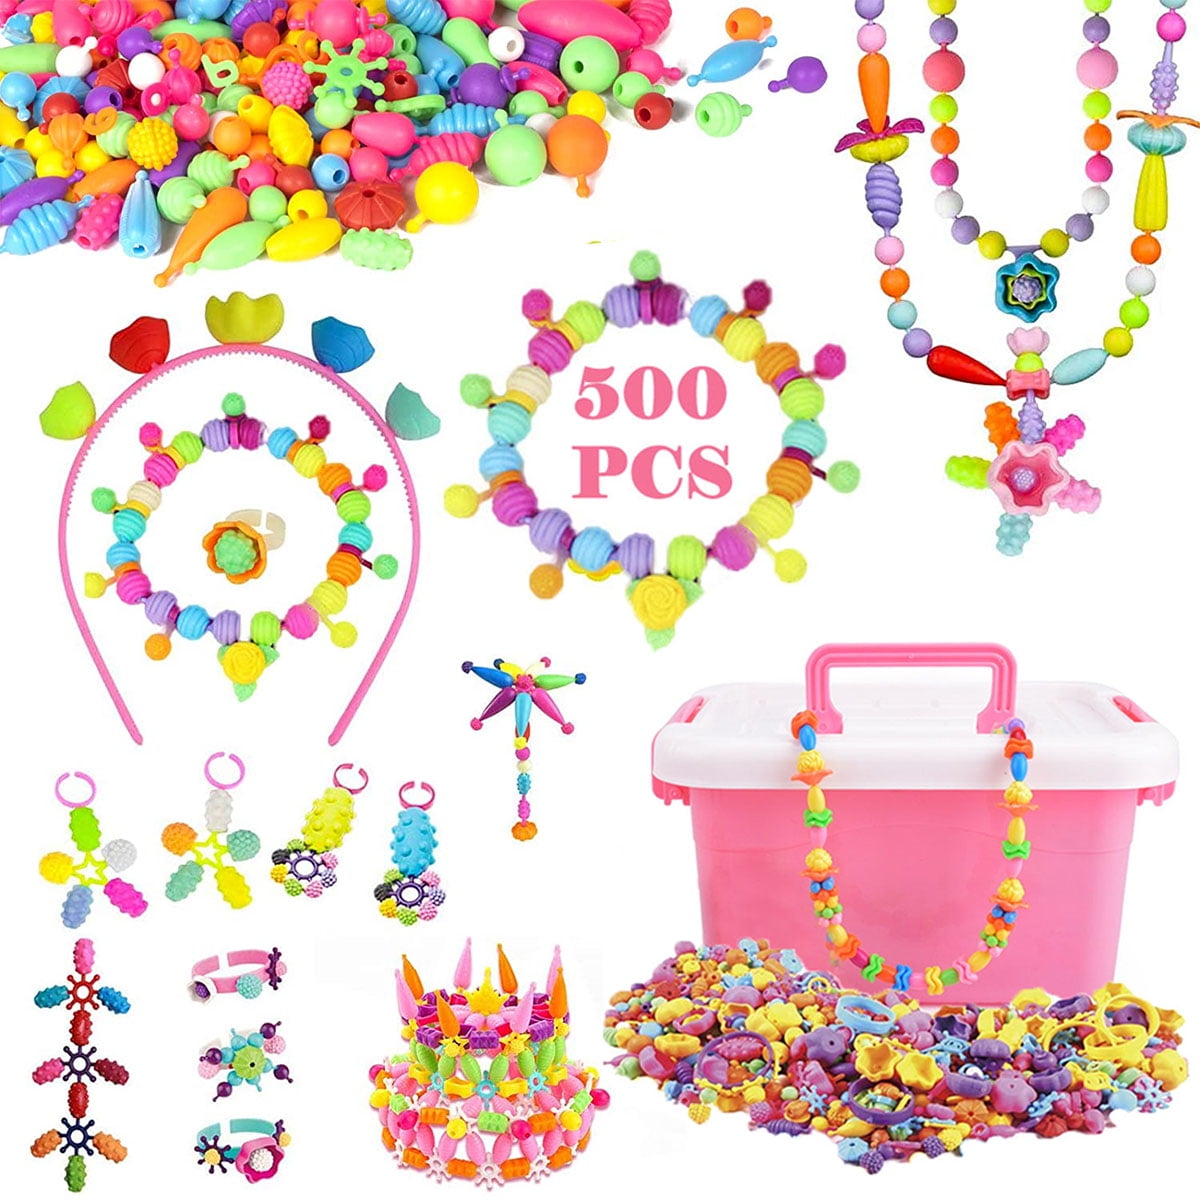 Beados Teeneez Starter Pack, with 500 Beads, a 4-Color Pen and More -  Walmart.com